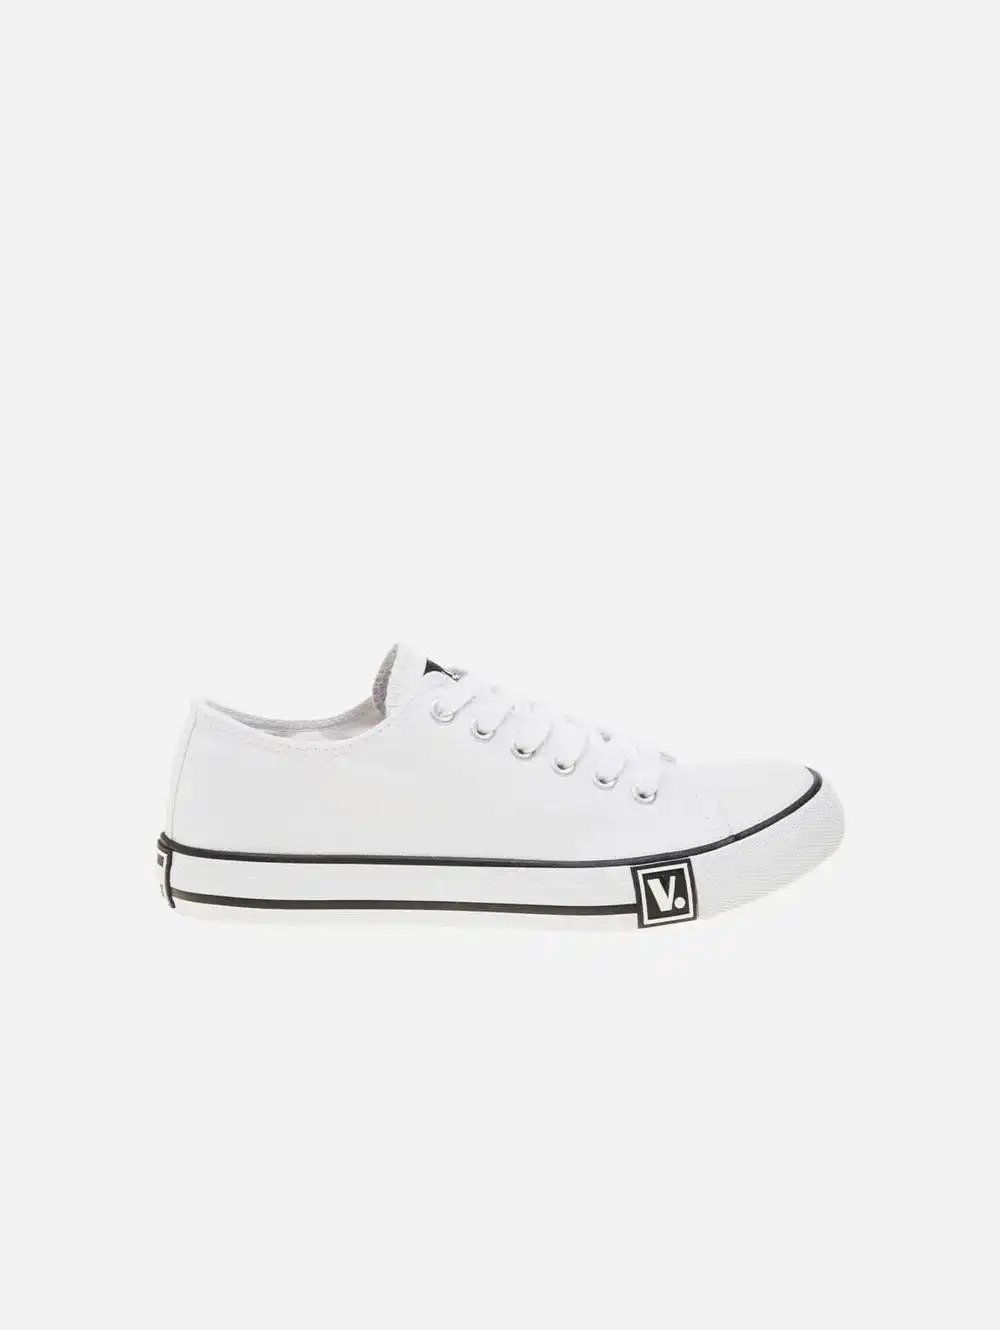 V.Gan Chia women's recycled cotton trainers